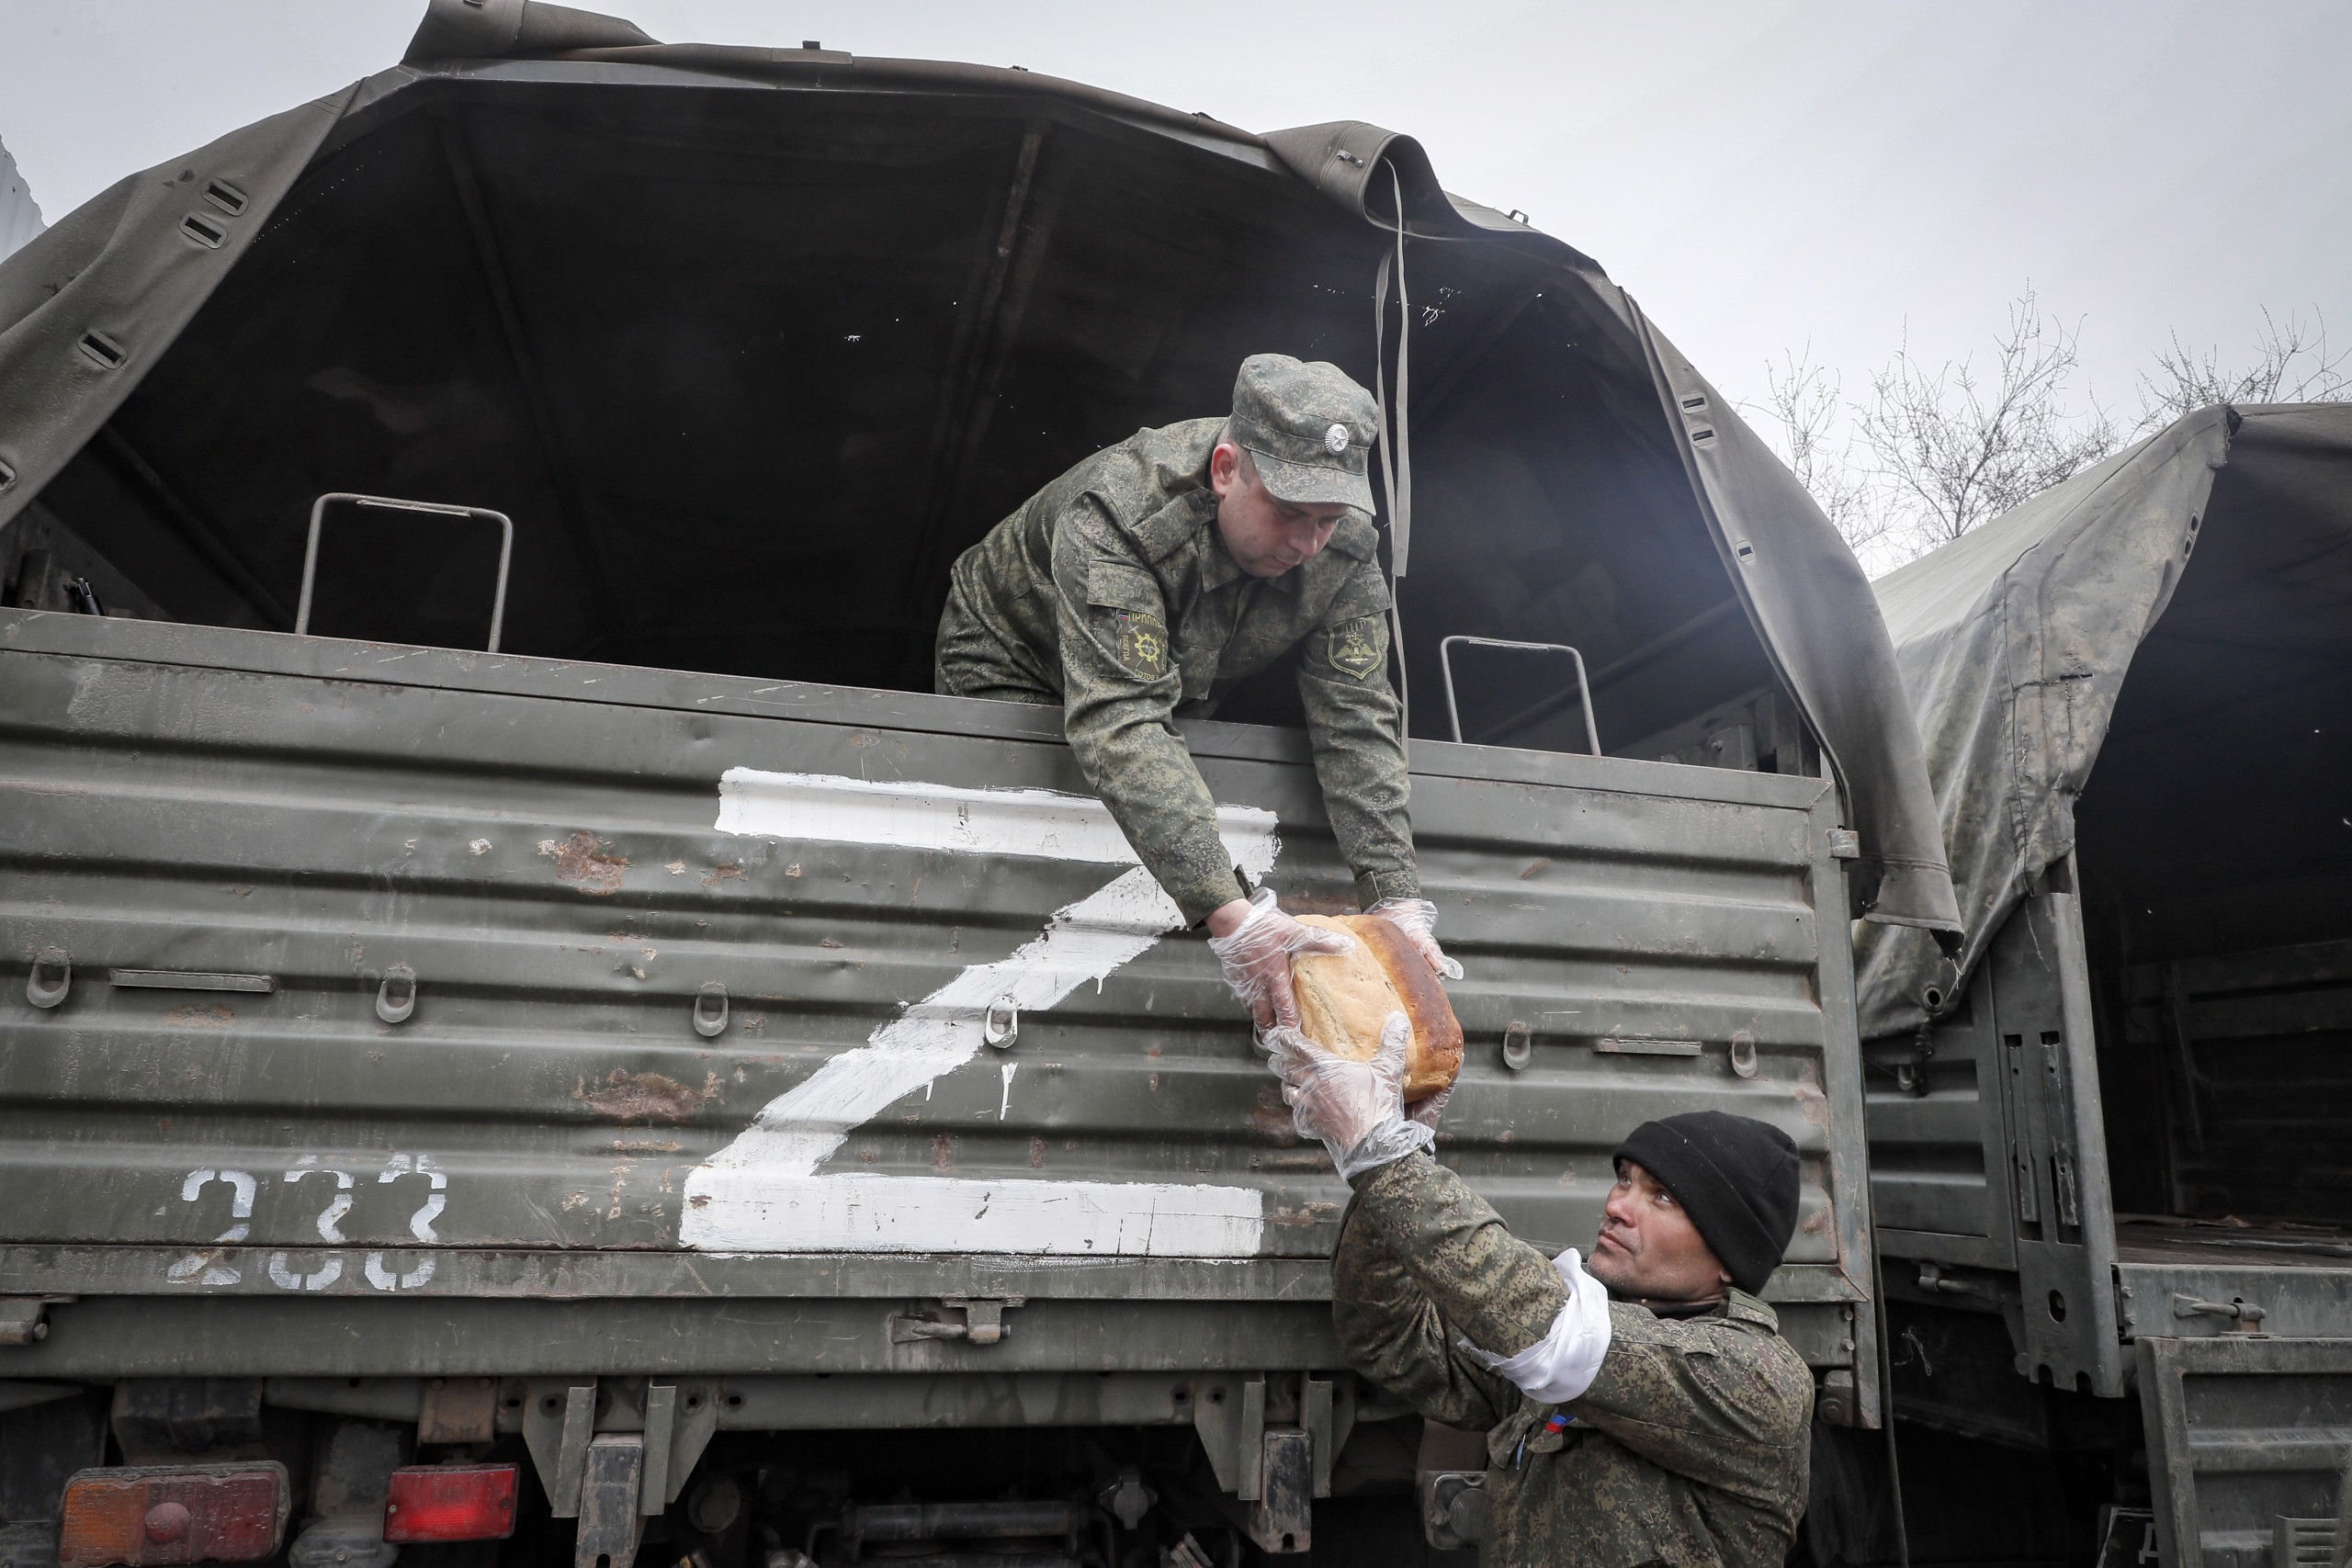 epa09886129 A picture taken during a visit to Mariupol organized by the Russian military shows militias of self-proclaimed DPR unload bread during a distribution of humanitarian aid to local people in Mariupol, Ukraine, 12 April 2022. Some 133,214 people, including two thousand people over the past day, left Mariupol through the gum corridor in the eastern direction, according to the head of the Russian National Defense Control Center. The main battles in the central part of Mariupol are over, said the representative of the people's militia of the self-proclaimed Donetsk People's Republic (DPR). On 24 February Russian troops had entered Ukrainian territory in what the Russian president declared a 'special military operation', resulting in fighting and destruction in the country, a huge flow of refugees, and multiple sanctions against Russia.  EPA/SERGEI ILNITSKY